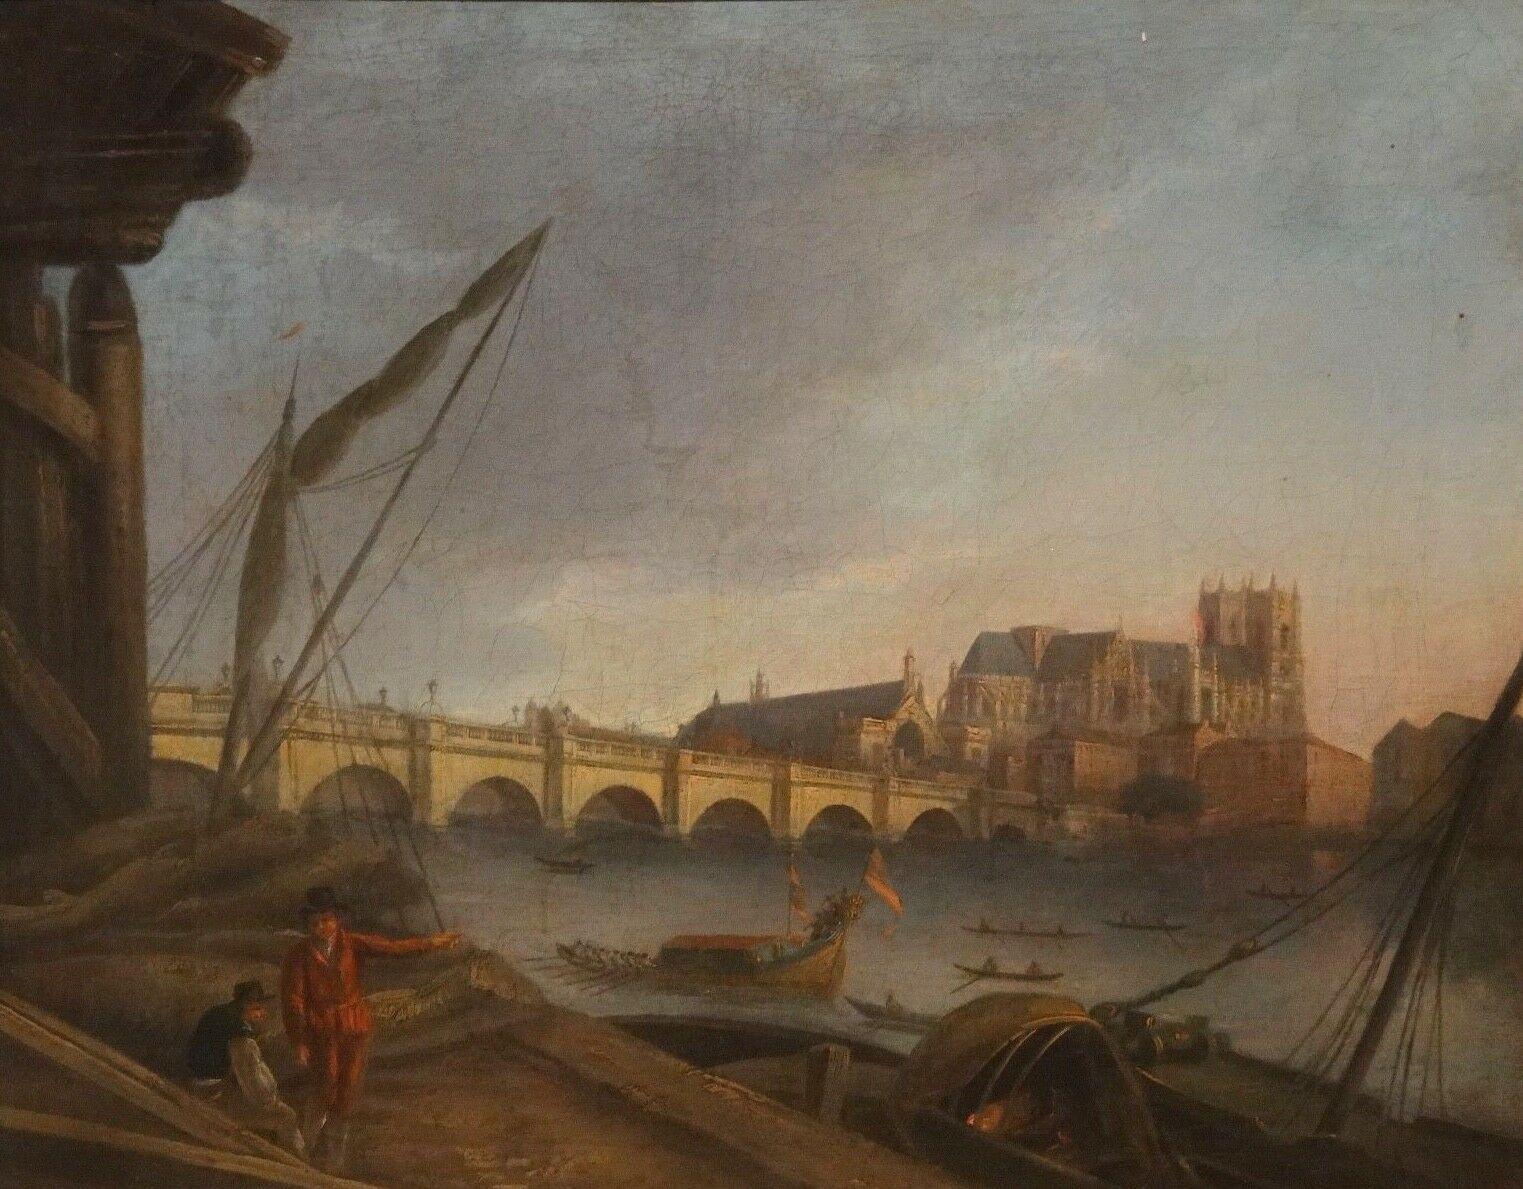 Westminster From The South, 18th Century - Painting by Joseph FARINGTON